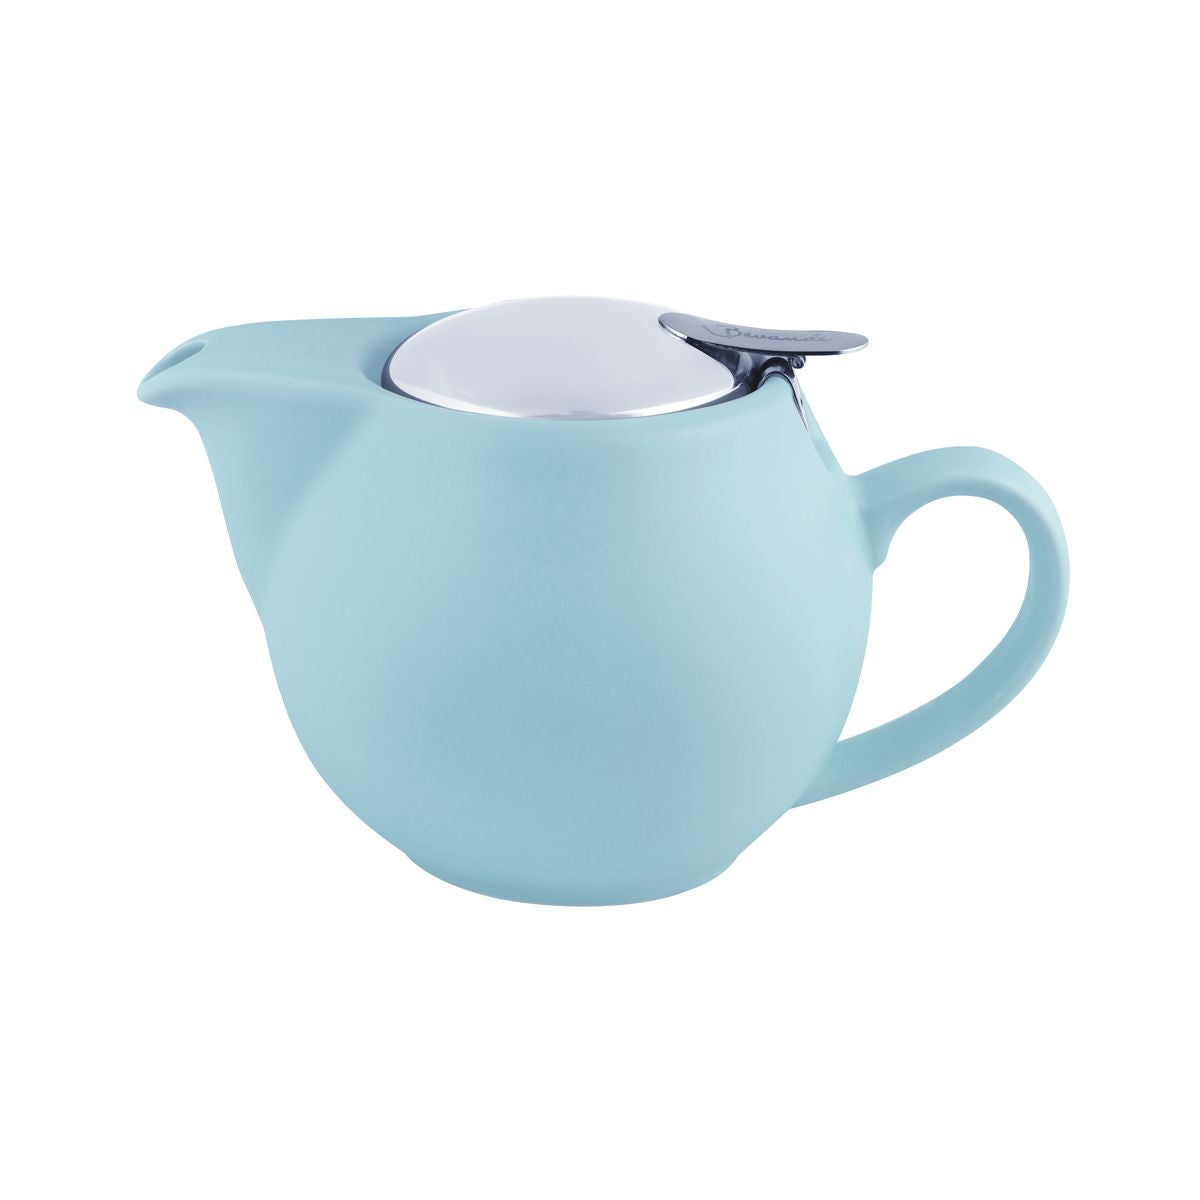 Teapot - Mist, 500ml from Bevande. made out of Porcelain and sold in boxes of 1. Hospitality quality at wholesale price with The Flying Fork! 